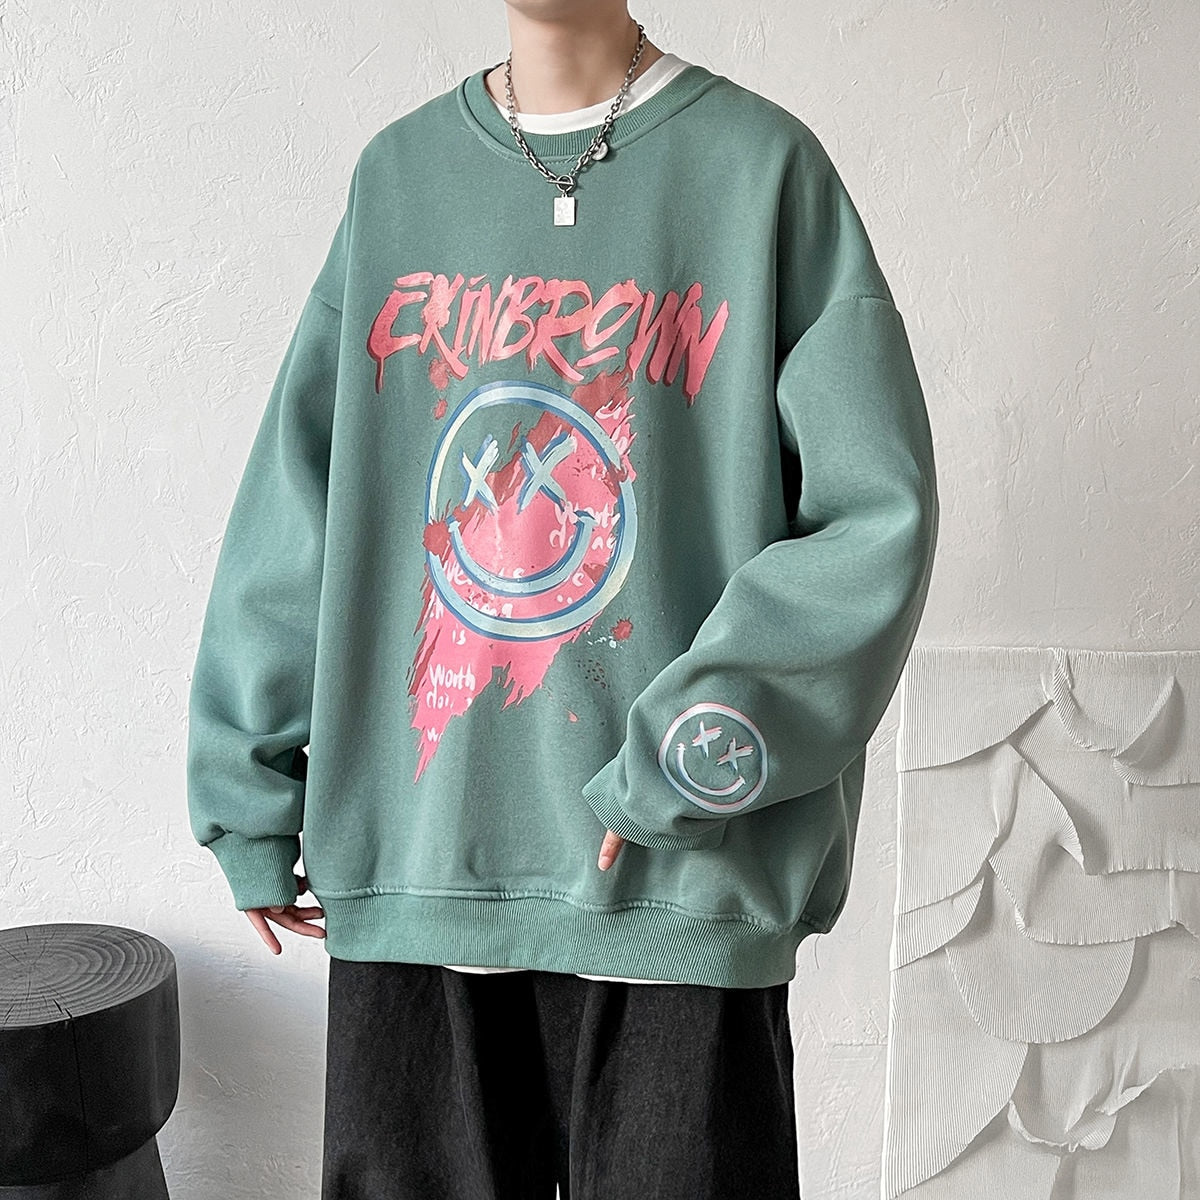 Oversized New Men's Sweatshirts Fashion Cartoon Graphic Casual O Neck Hoodies Korean Male Streetwear Pullover Clothing voguable